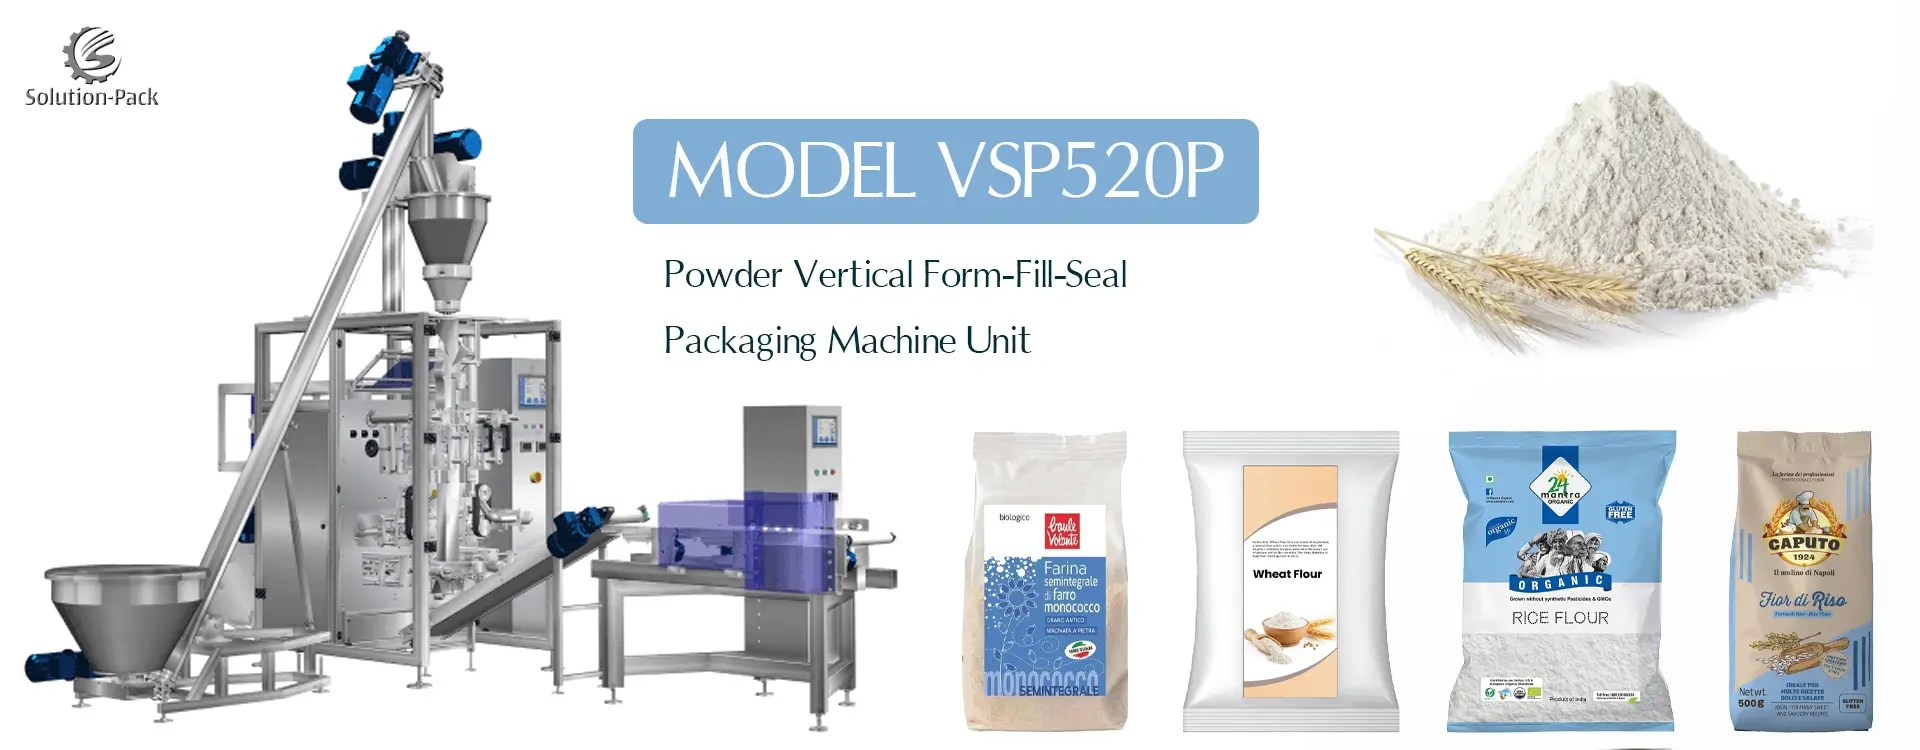 Model VSP520P Automatic Vertical Packaging Machine Unit | Solution-Pack (Heading Banner Picture)